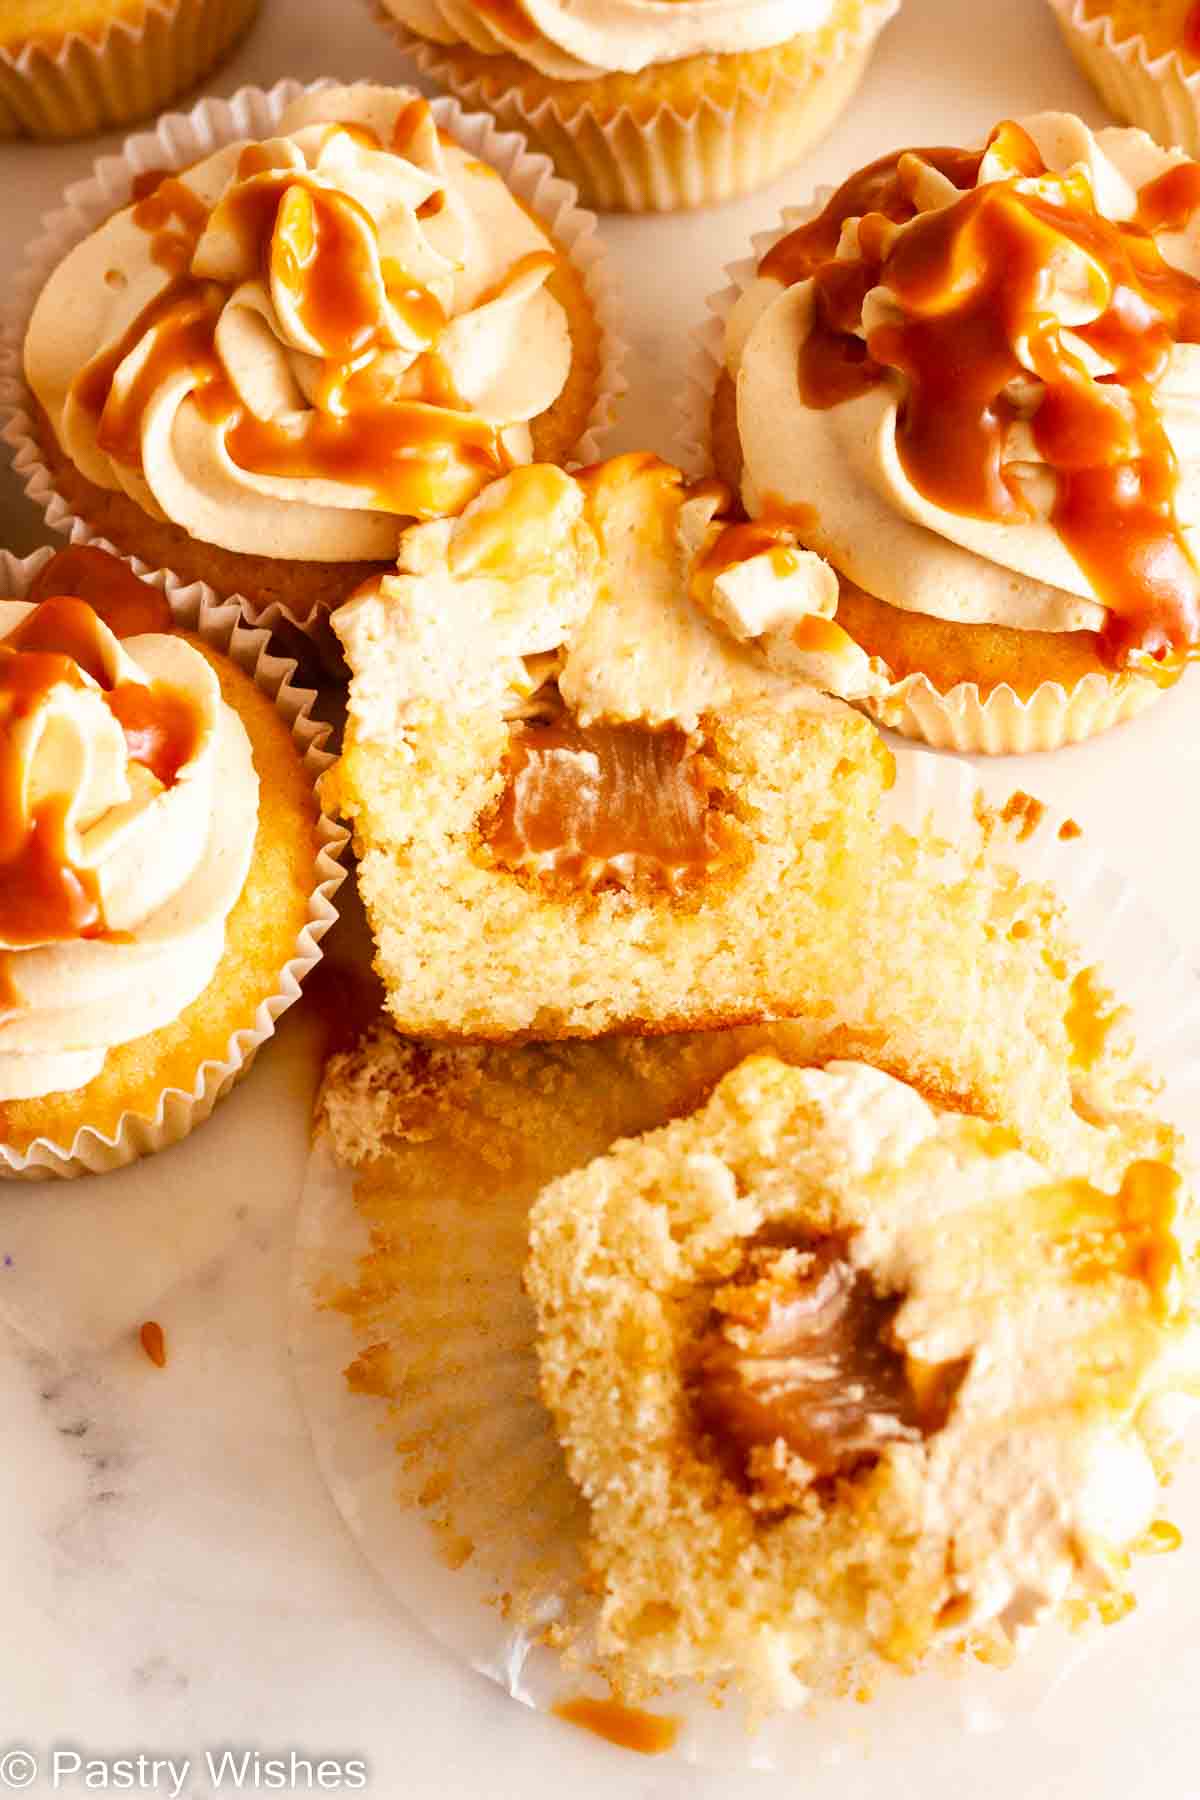 Caramel filled cupcakes on a white surface with a cupcake cut in half.